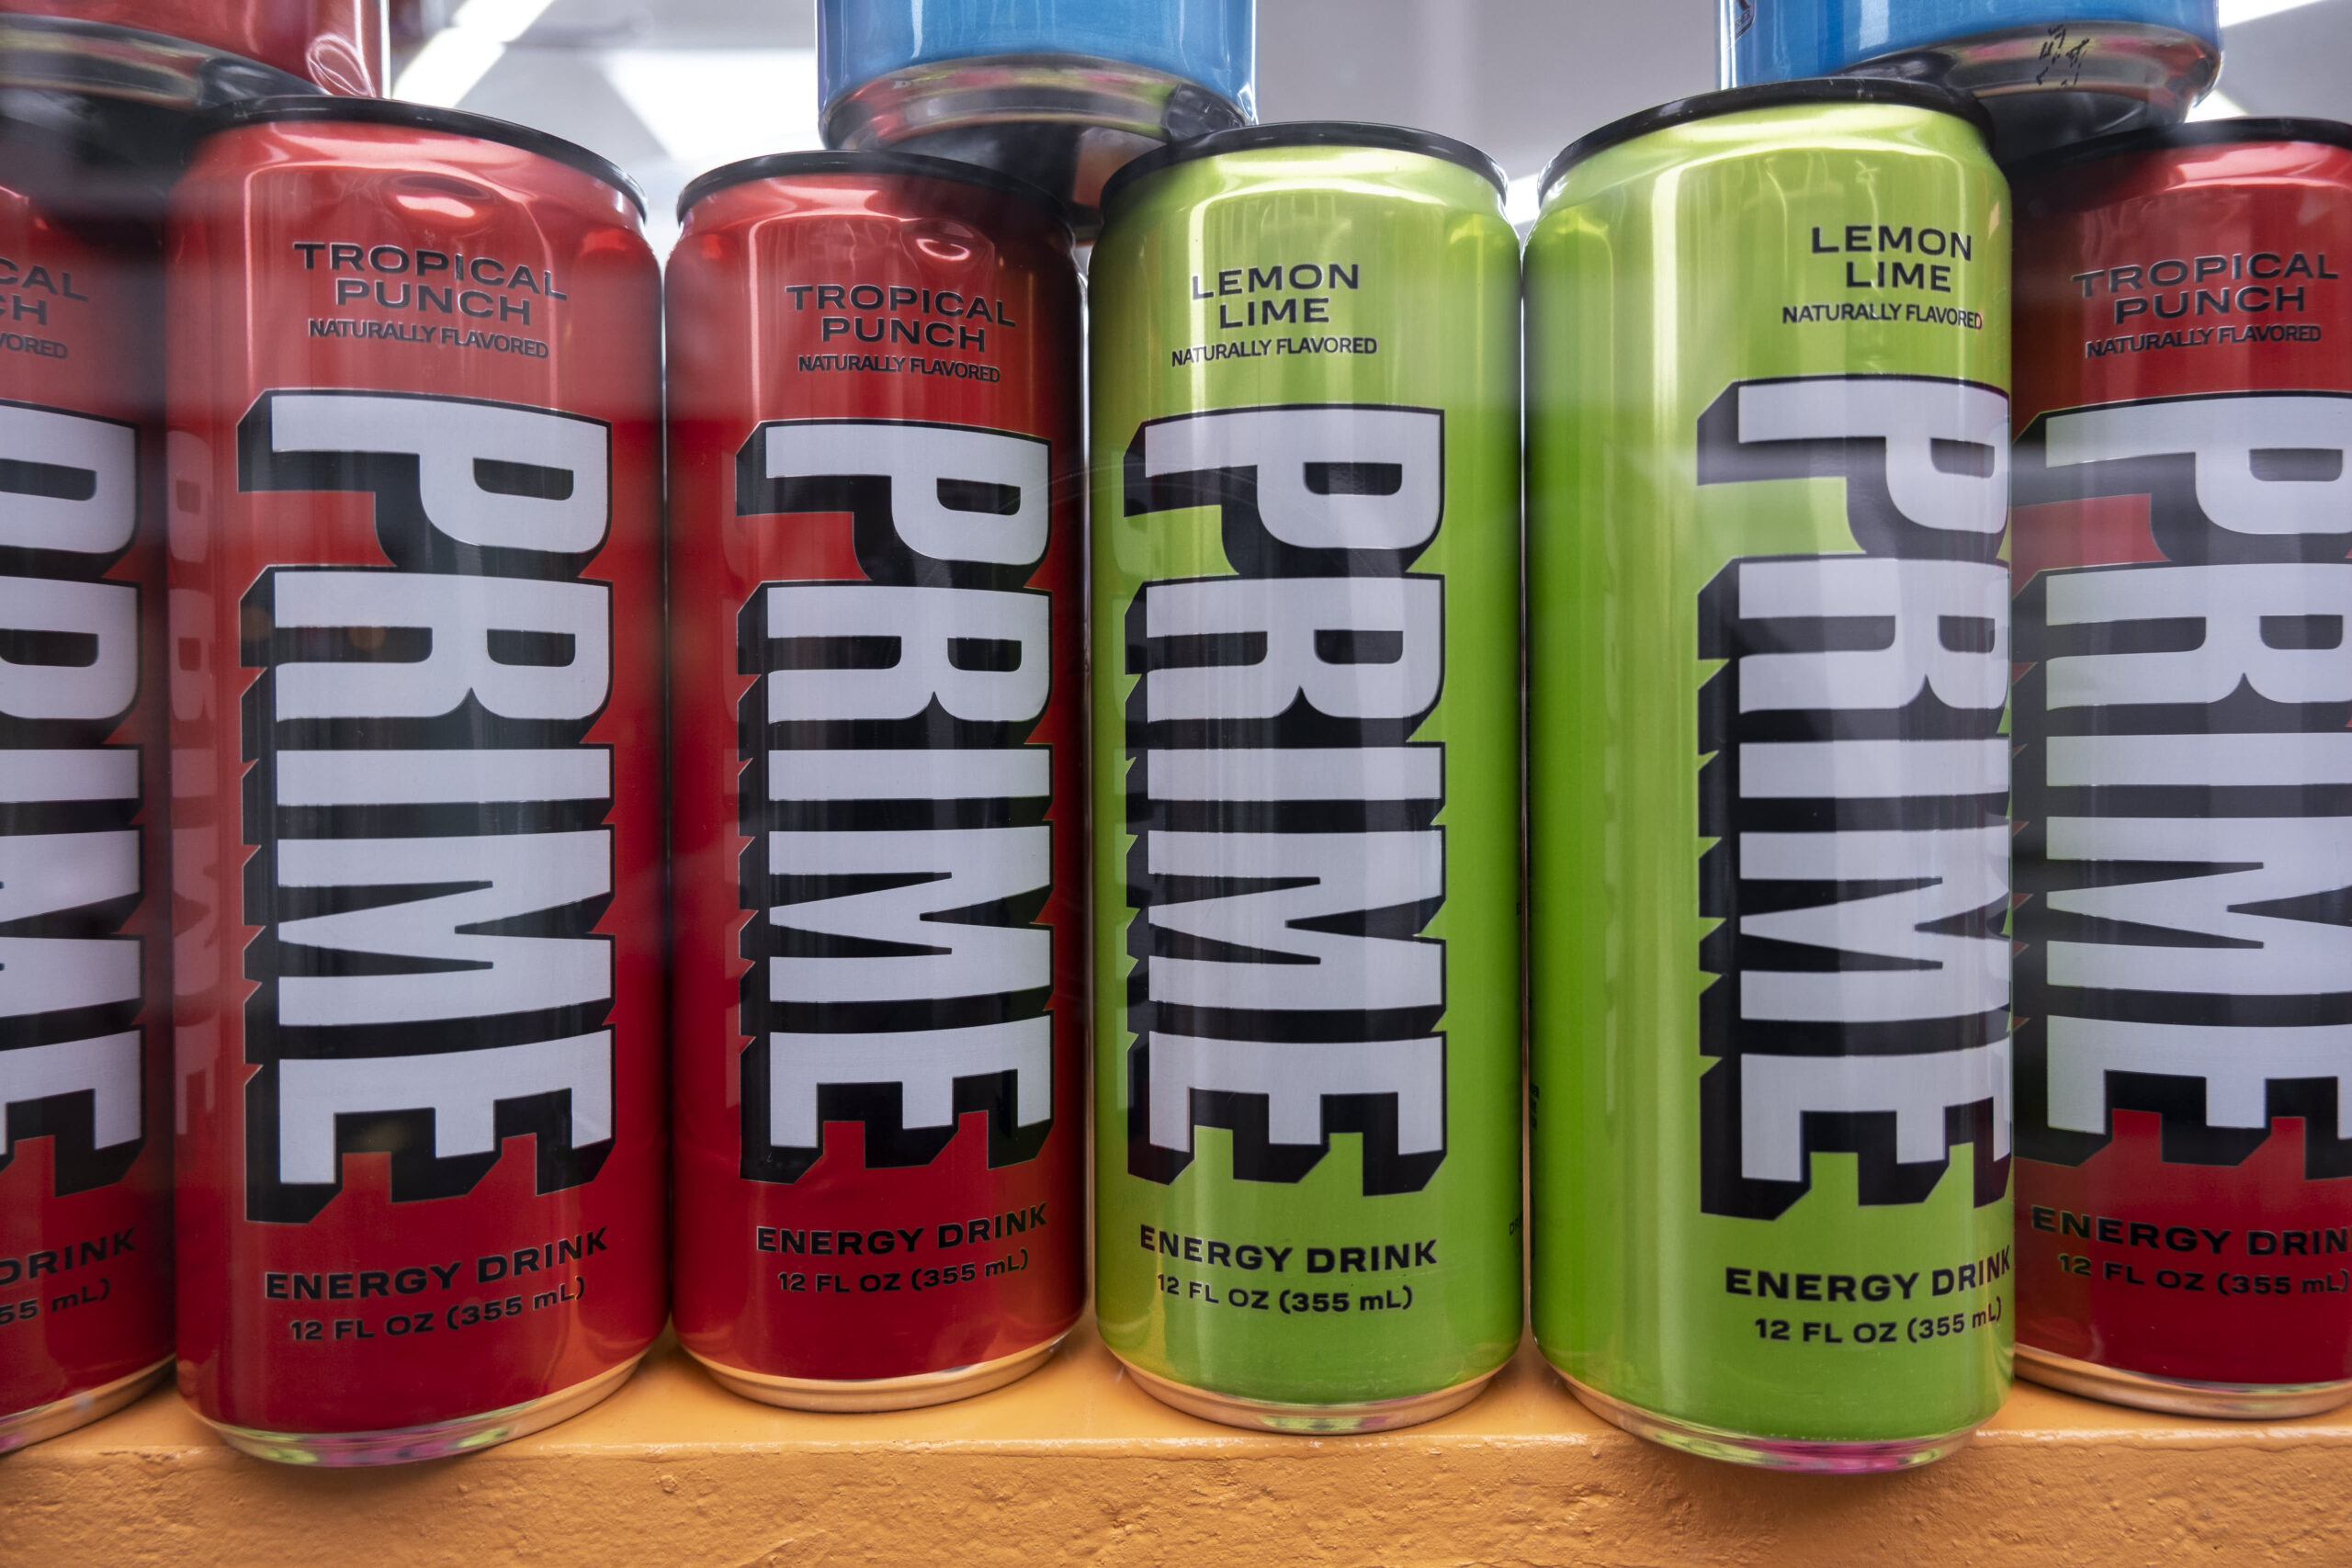 Schumer urges FDA to probe Prime energy drink backed by YouTube stars Logan Paul and KSI